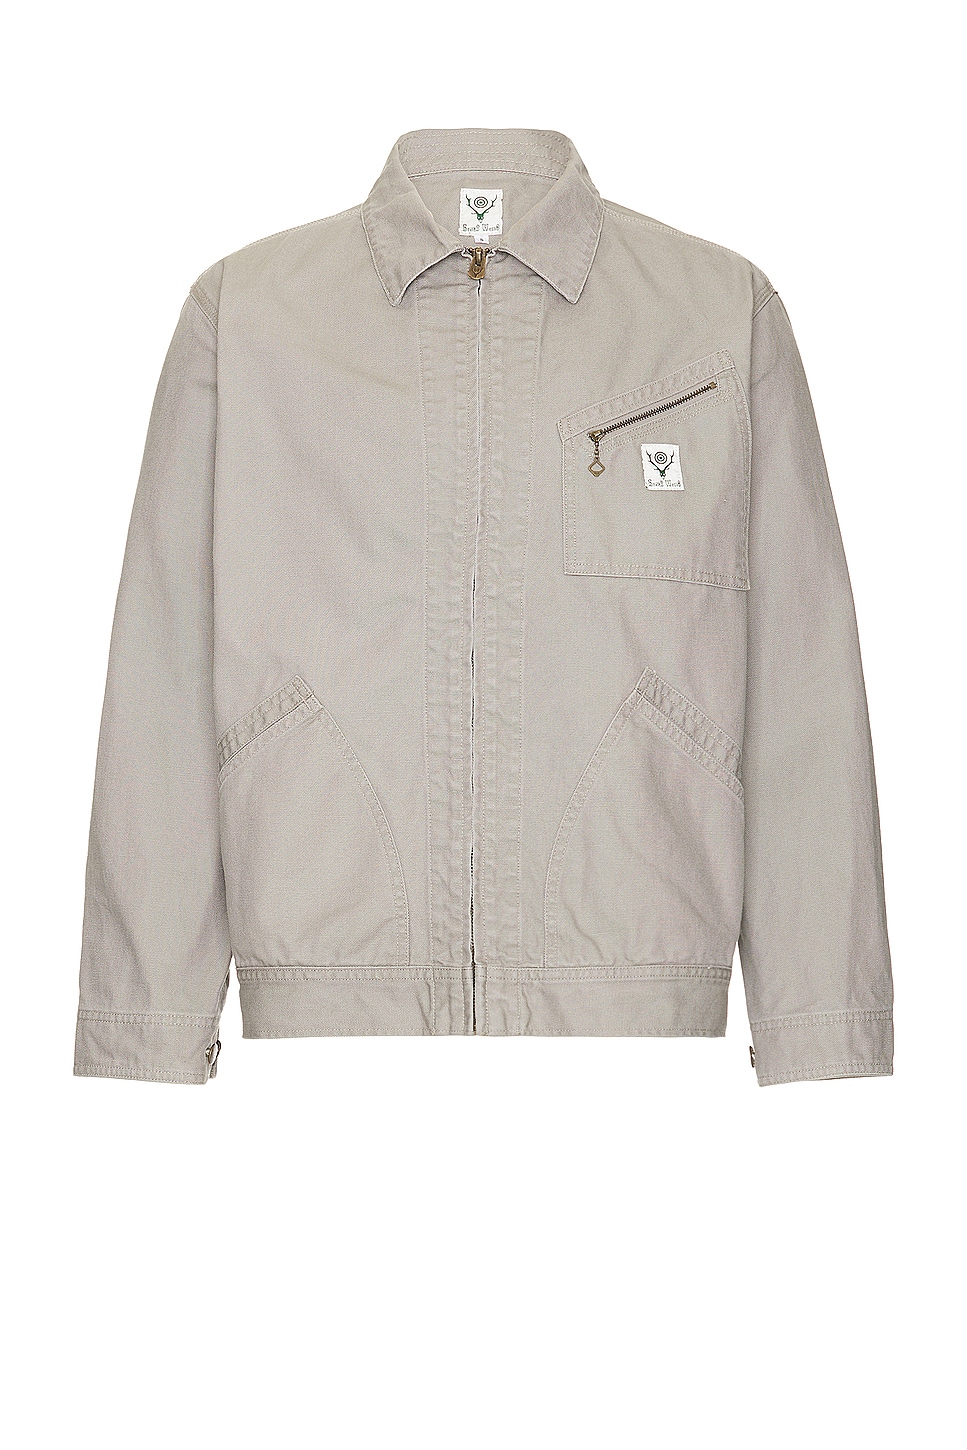 Image 1 of South2 West8 Work Jacket 115Oz Cotton Canvas in A-Grey